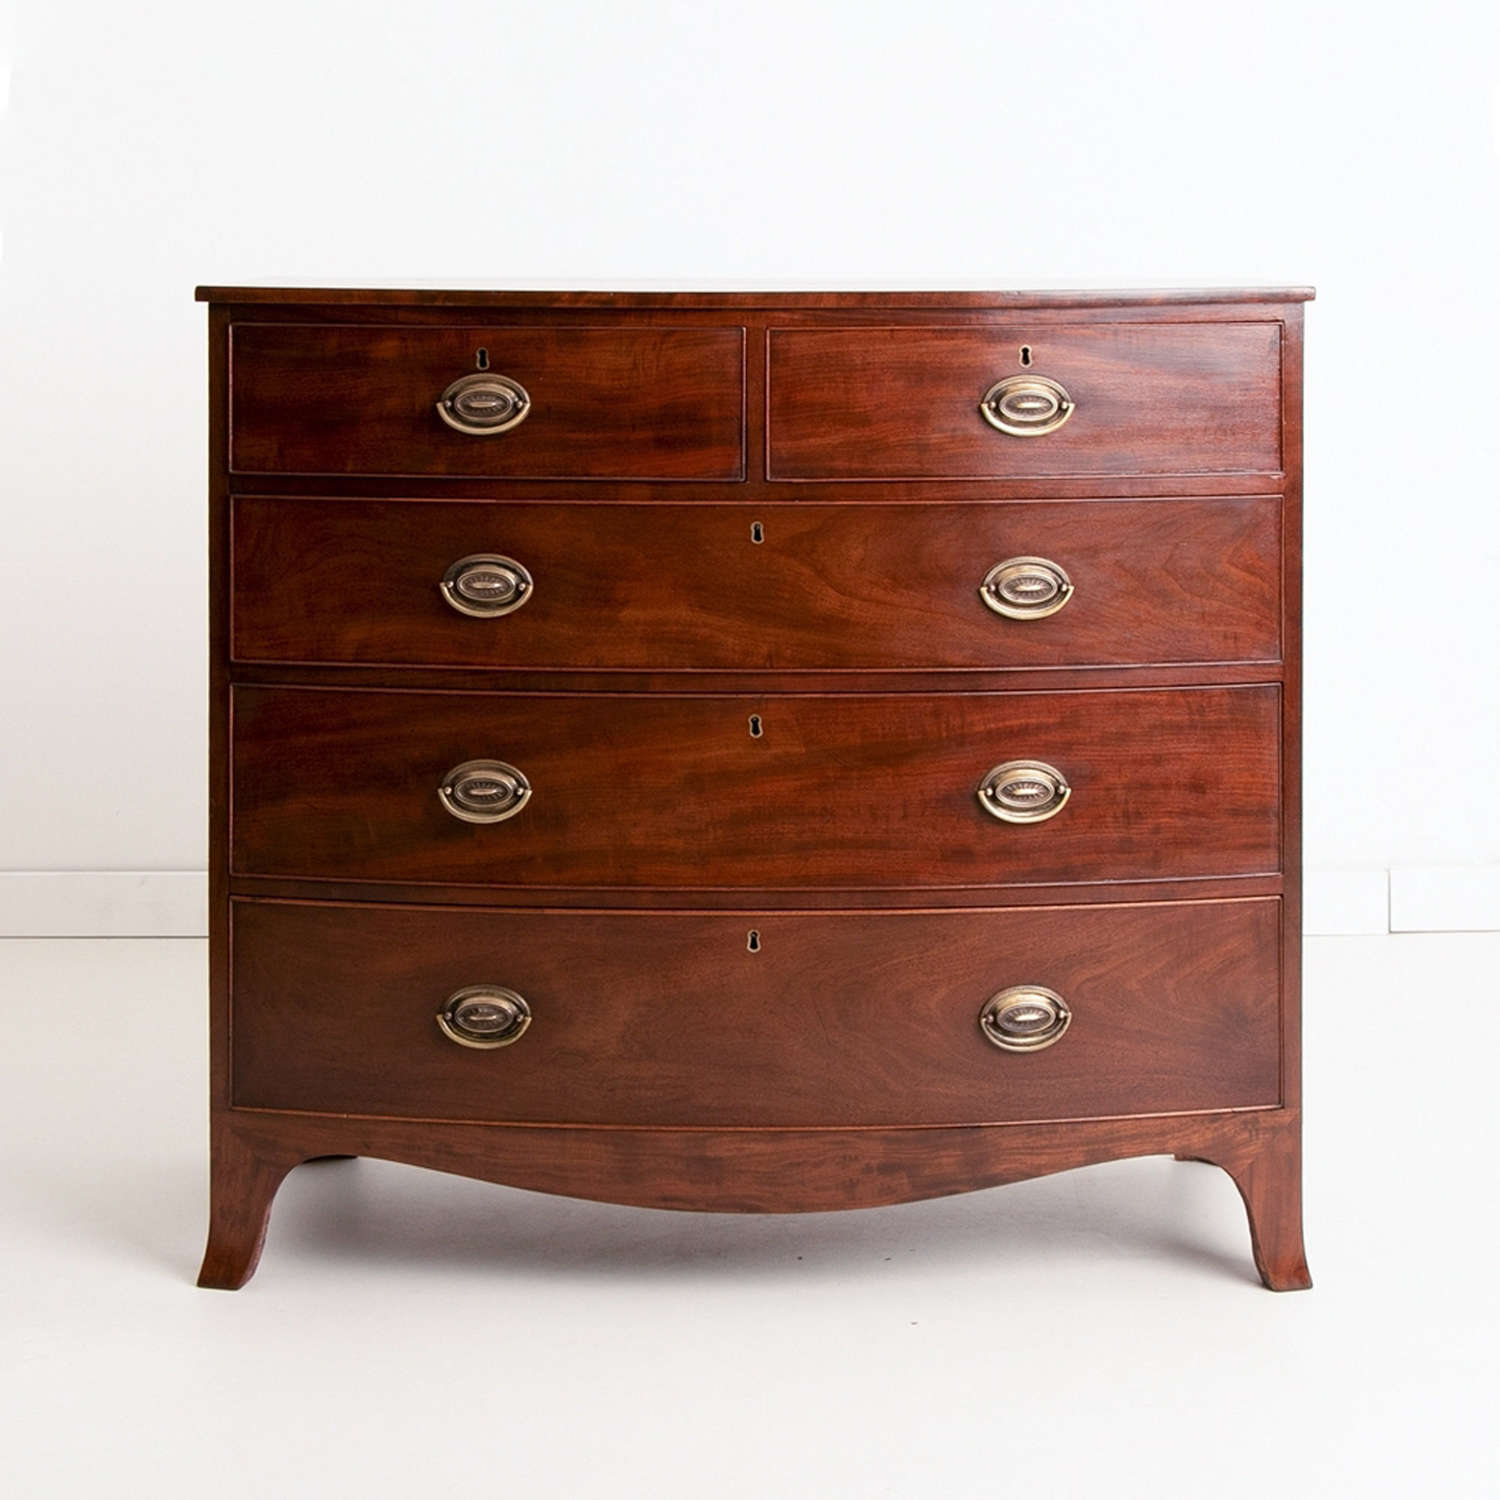 Victorian Mahogany Bow Fronted Chest of Drawers